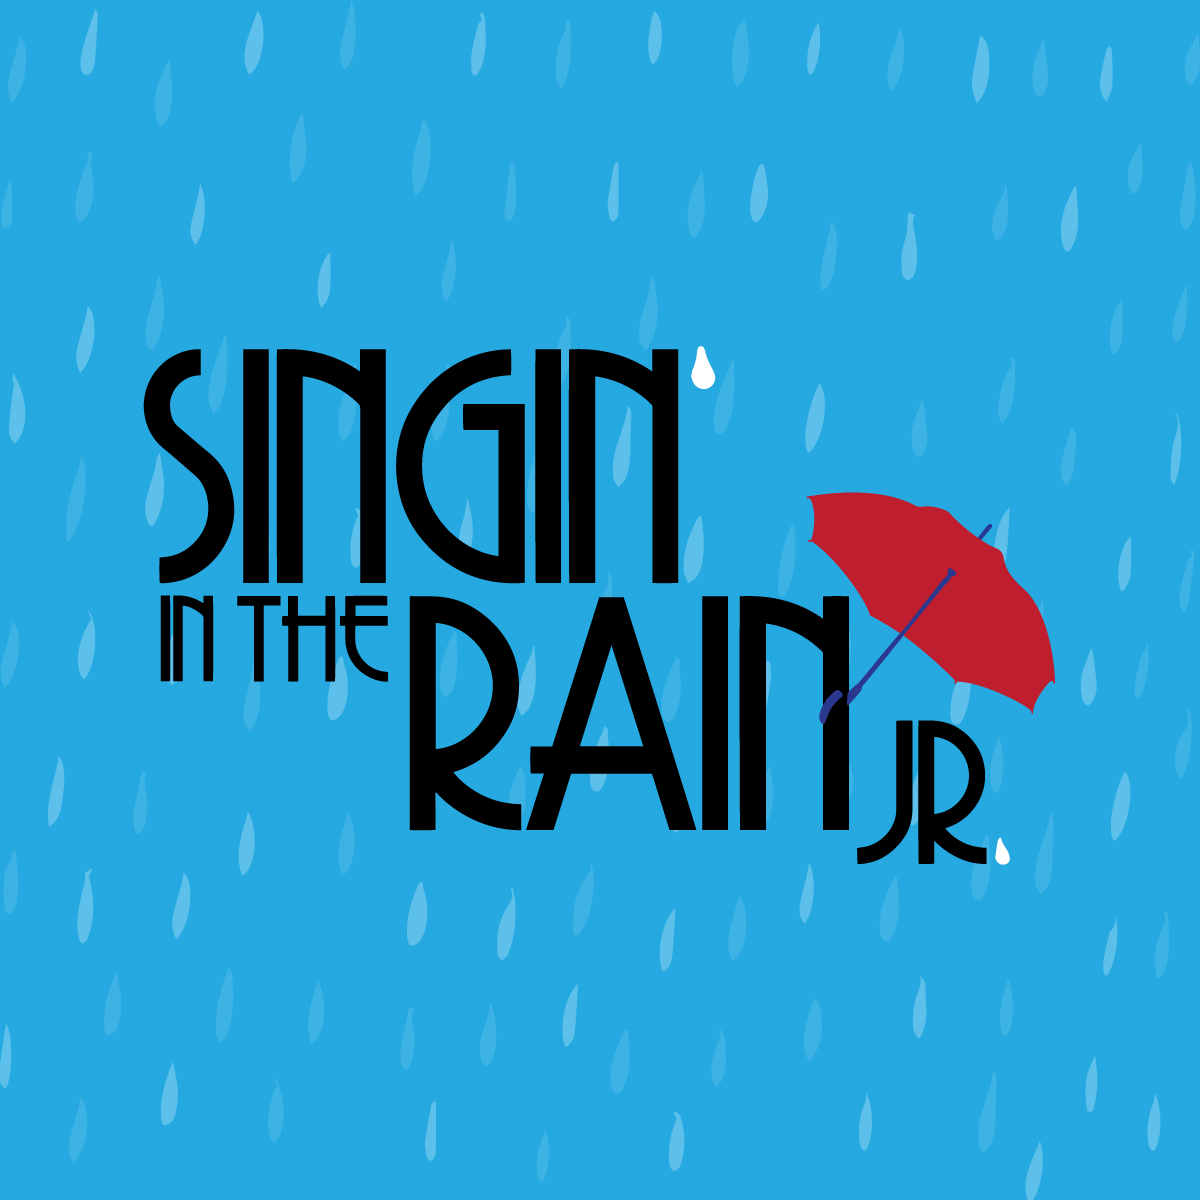 Red umbrella graphic against a blue background with raindrops